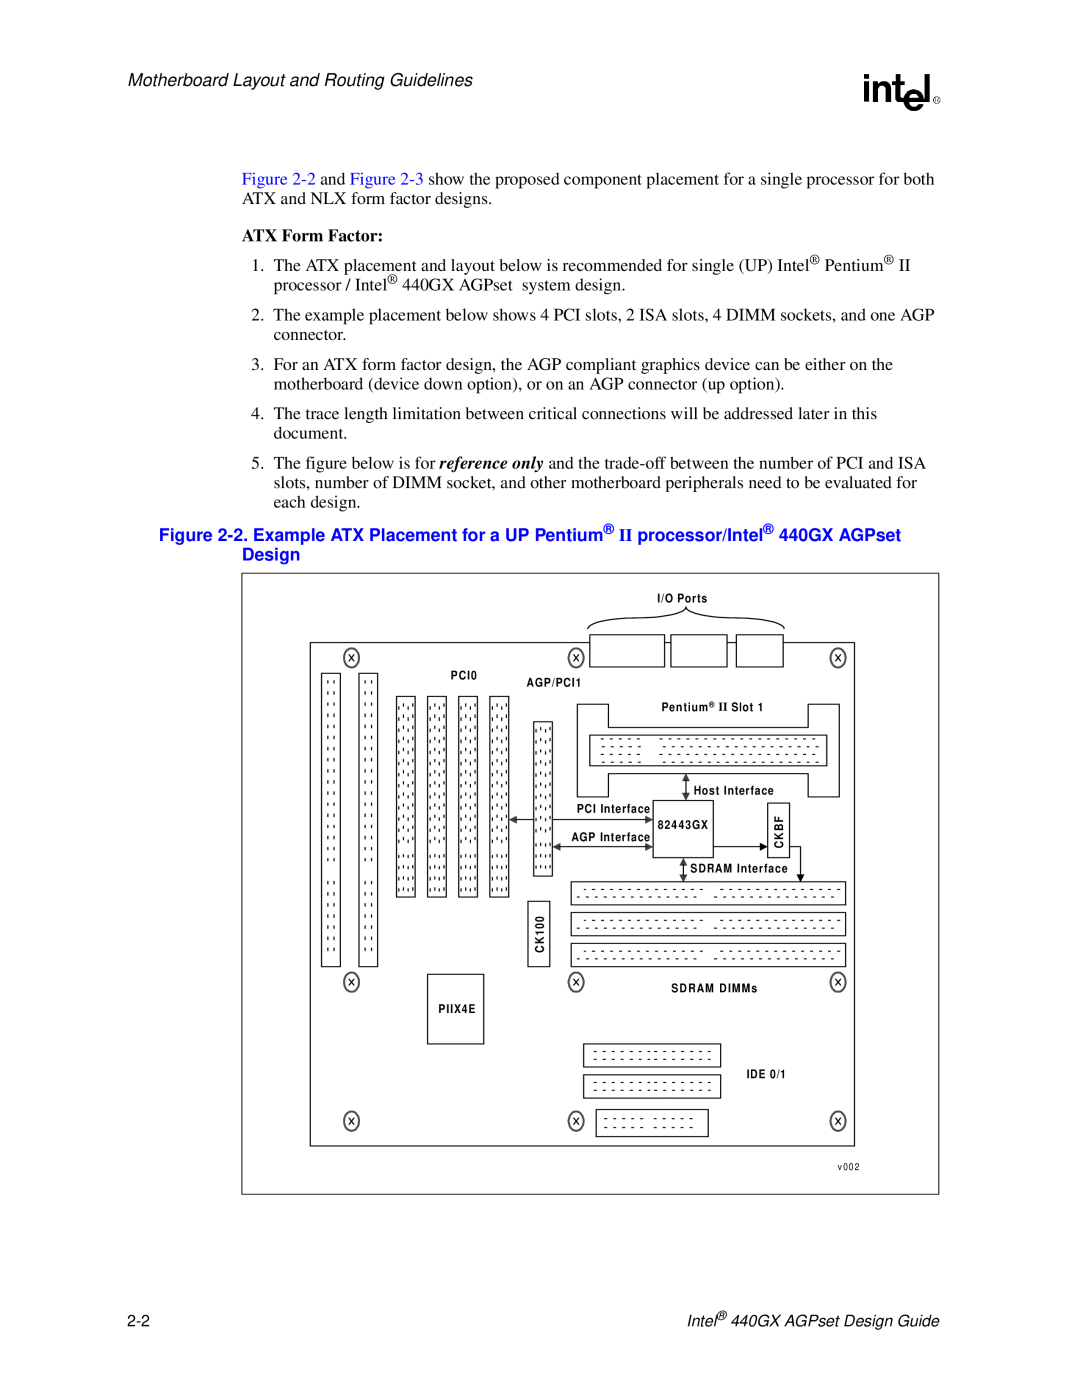 Intel 440GX manual Motherboard Layout and Routing Guidelines, ATX Form Factor 